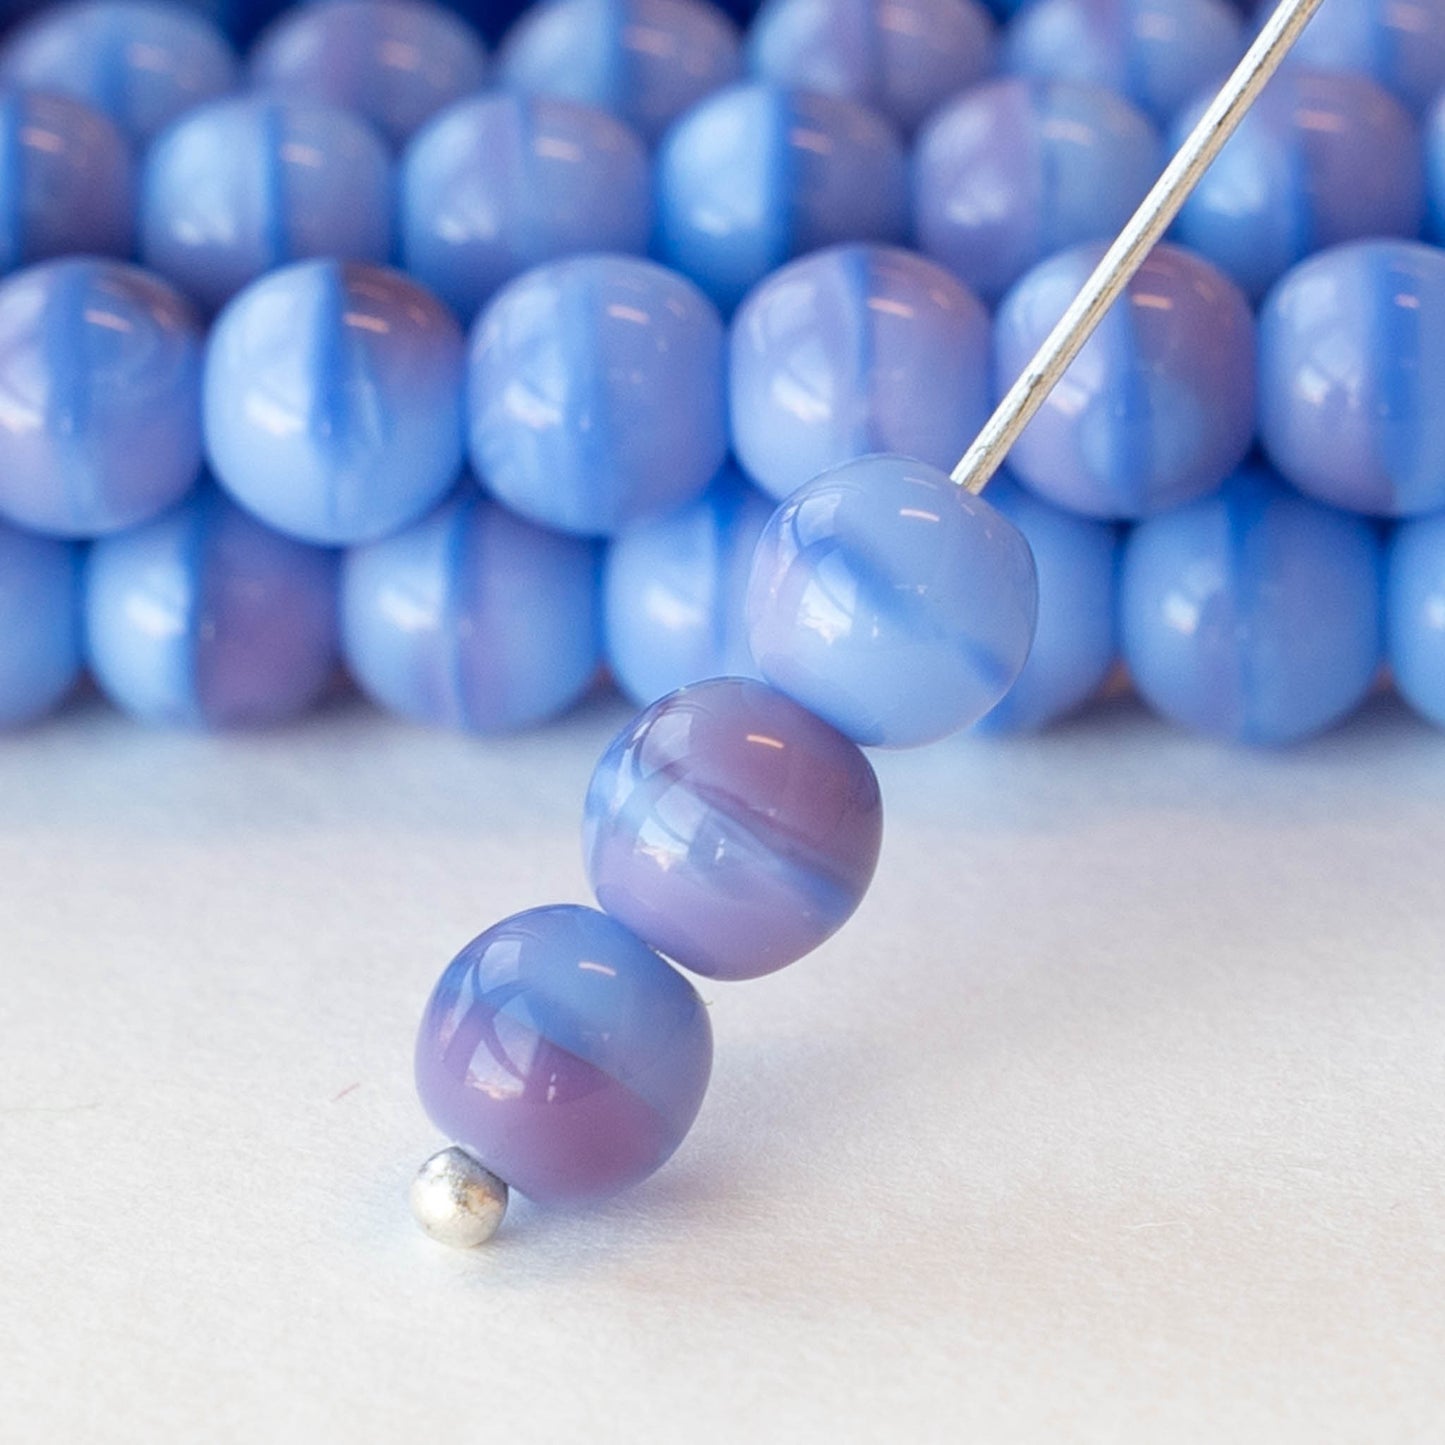 6mm Round Glass Beads -  Blue Lavender - 50 Beads